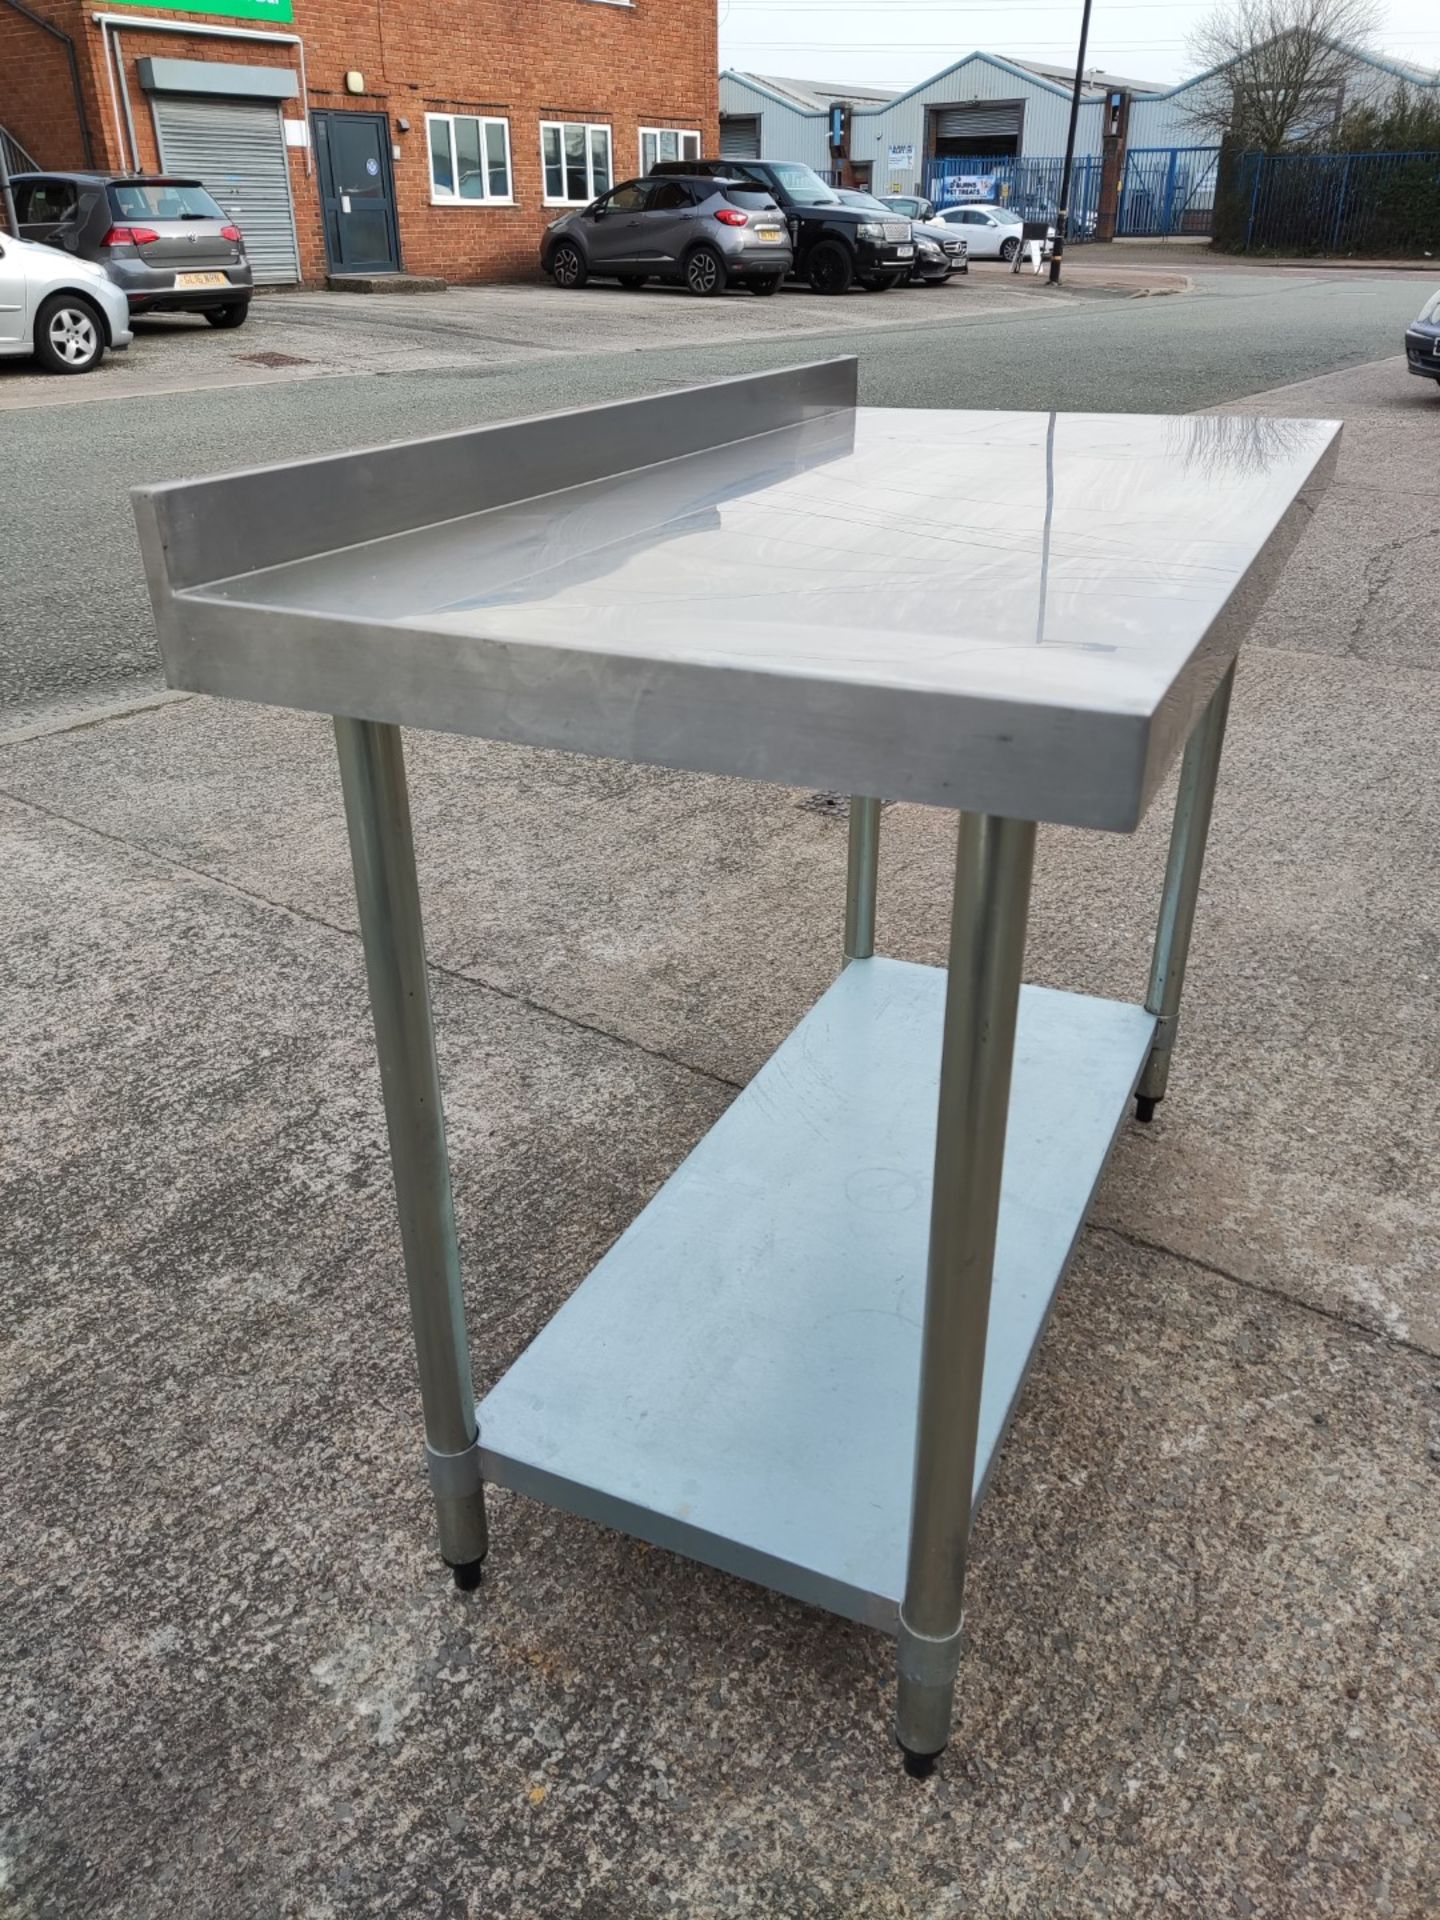 1 x Vogue Stainless Steel Prep Bench with Upstand and Shelf - 120cm (L) x 60cm (W) x 90cm (H) - - Image 6 of 7